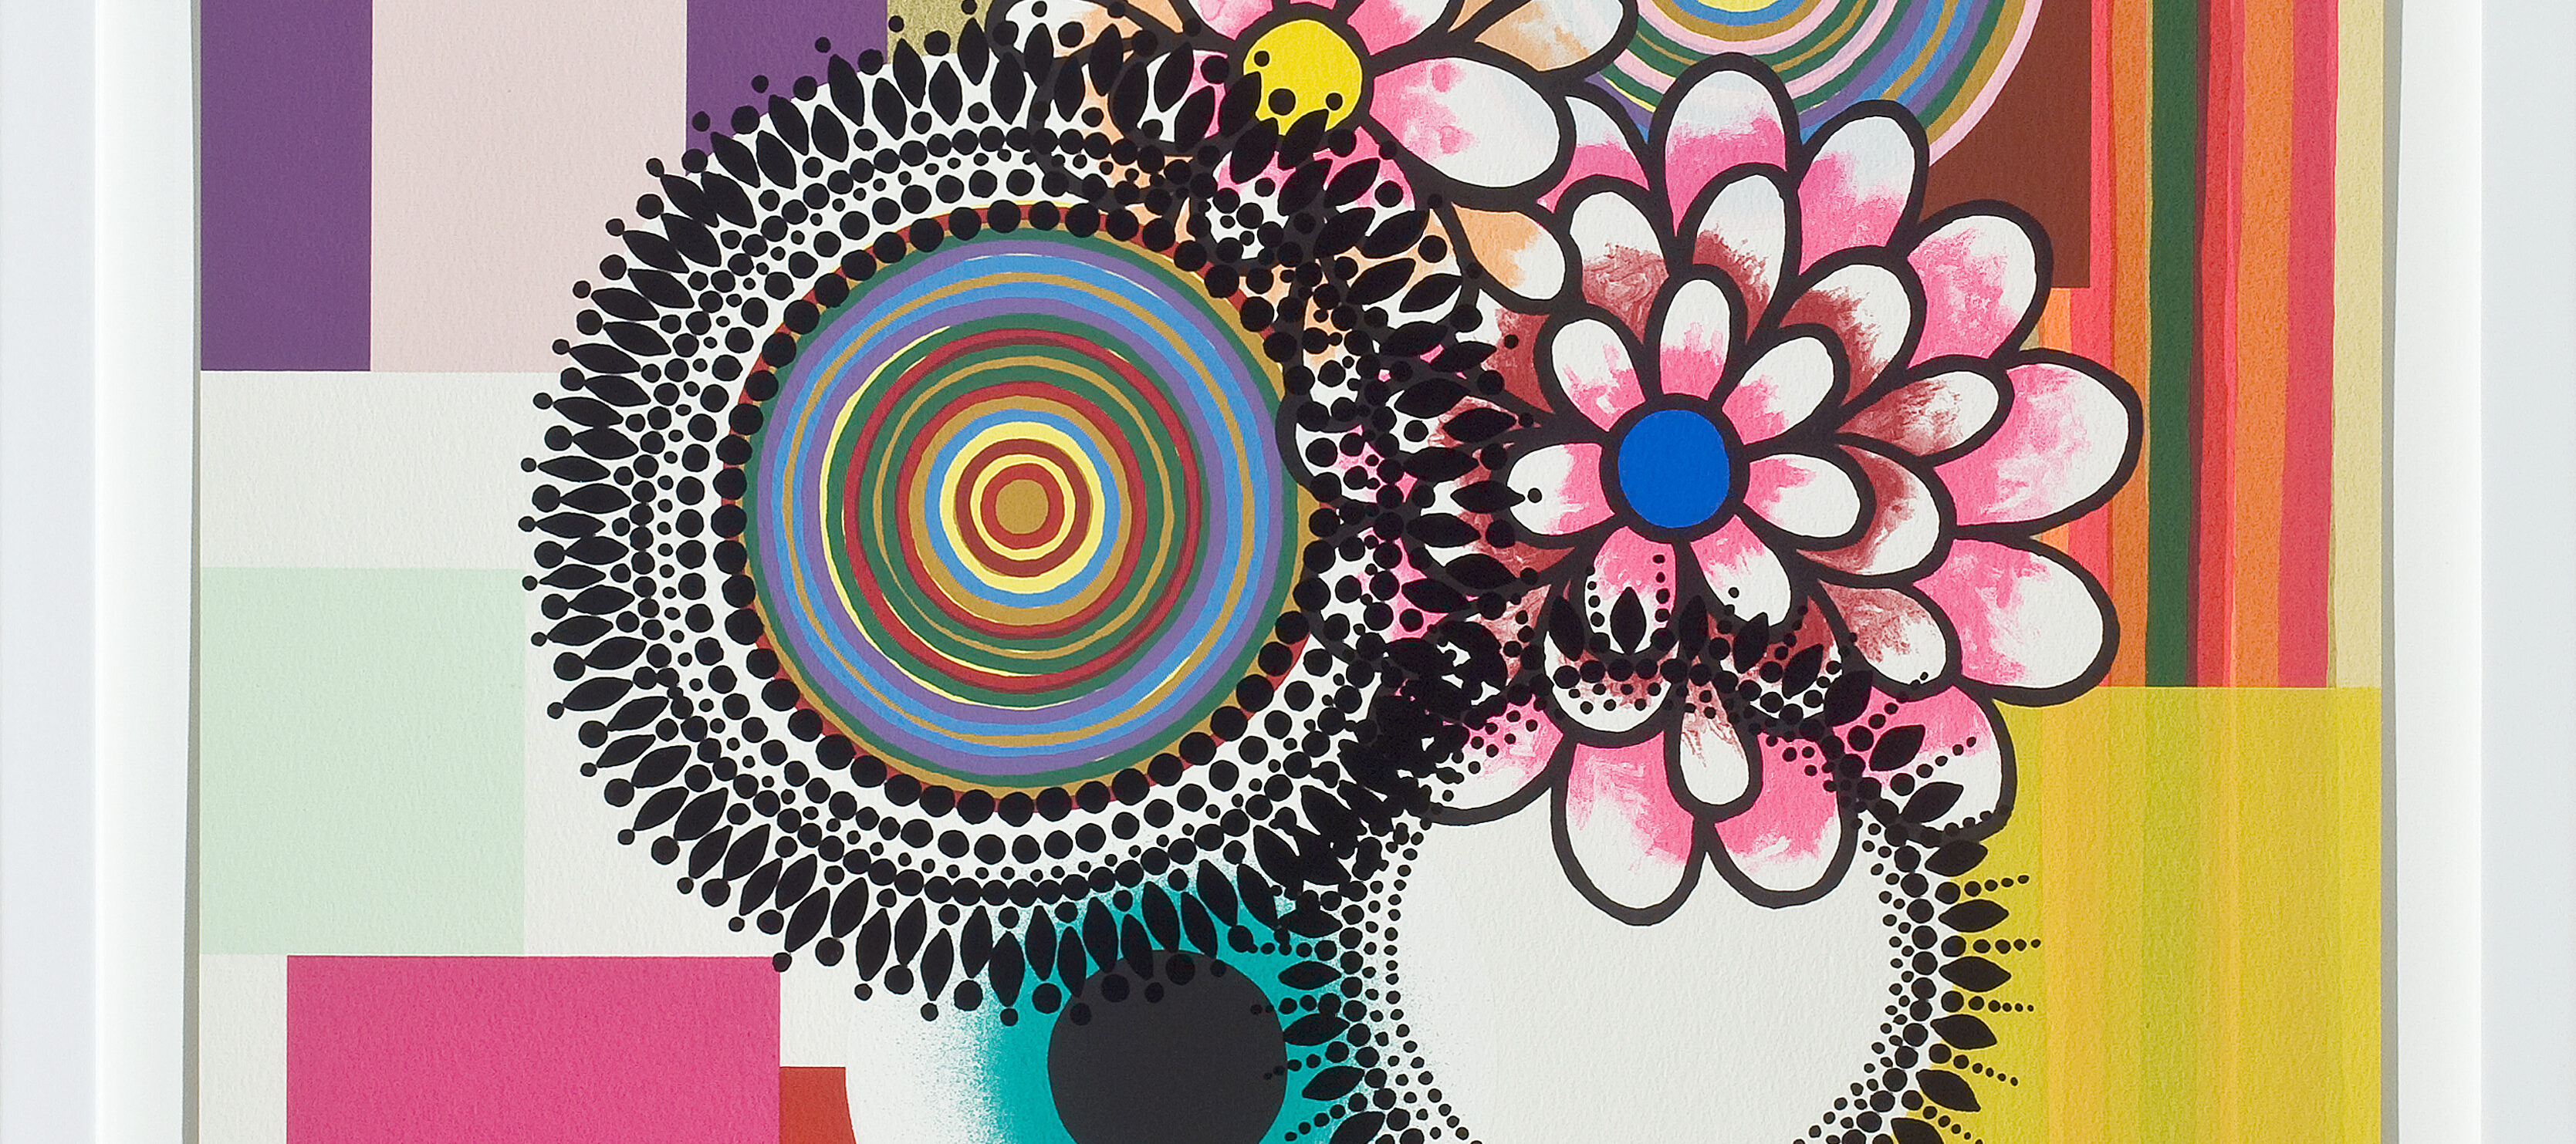 A square, vibrant print with colorful pink flowers and colorful, mandala-like circles against a geometric background of different colored rectangles and vertical stripes.